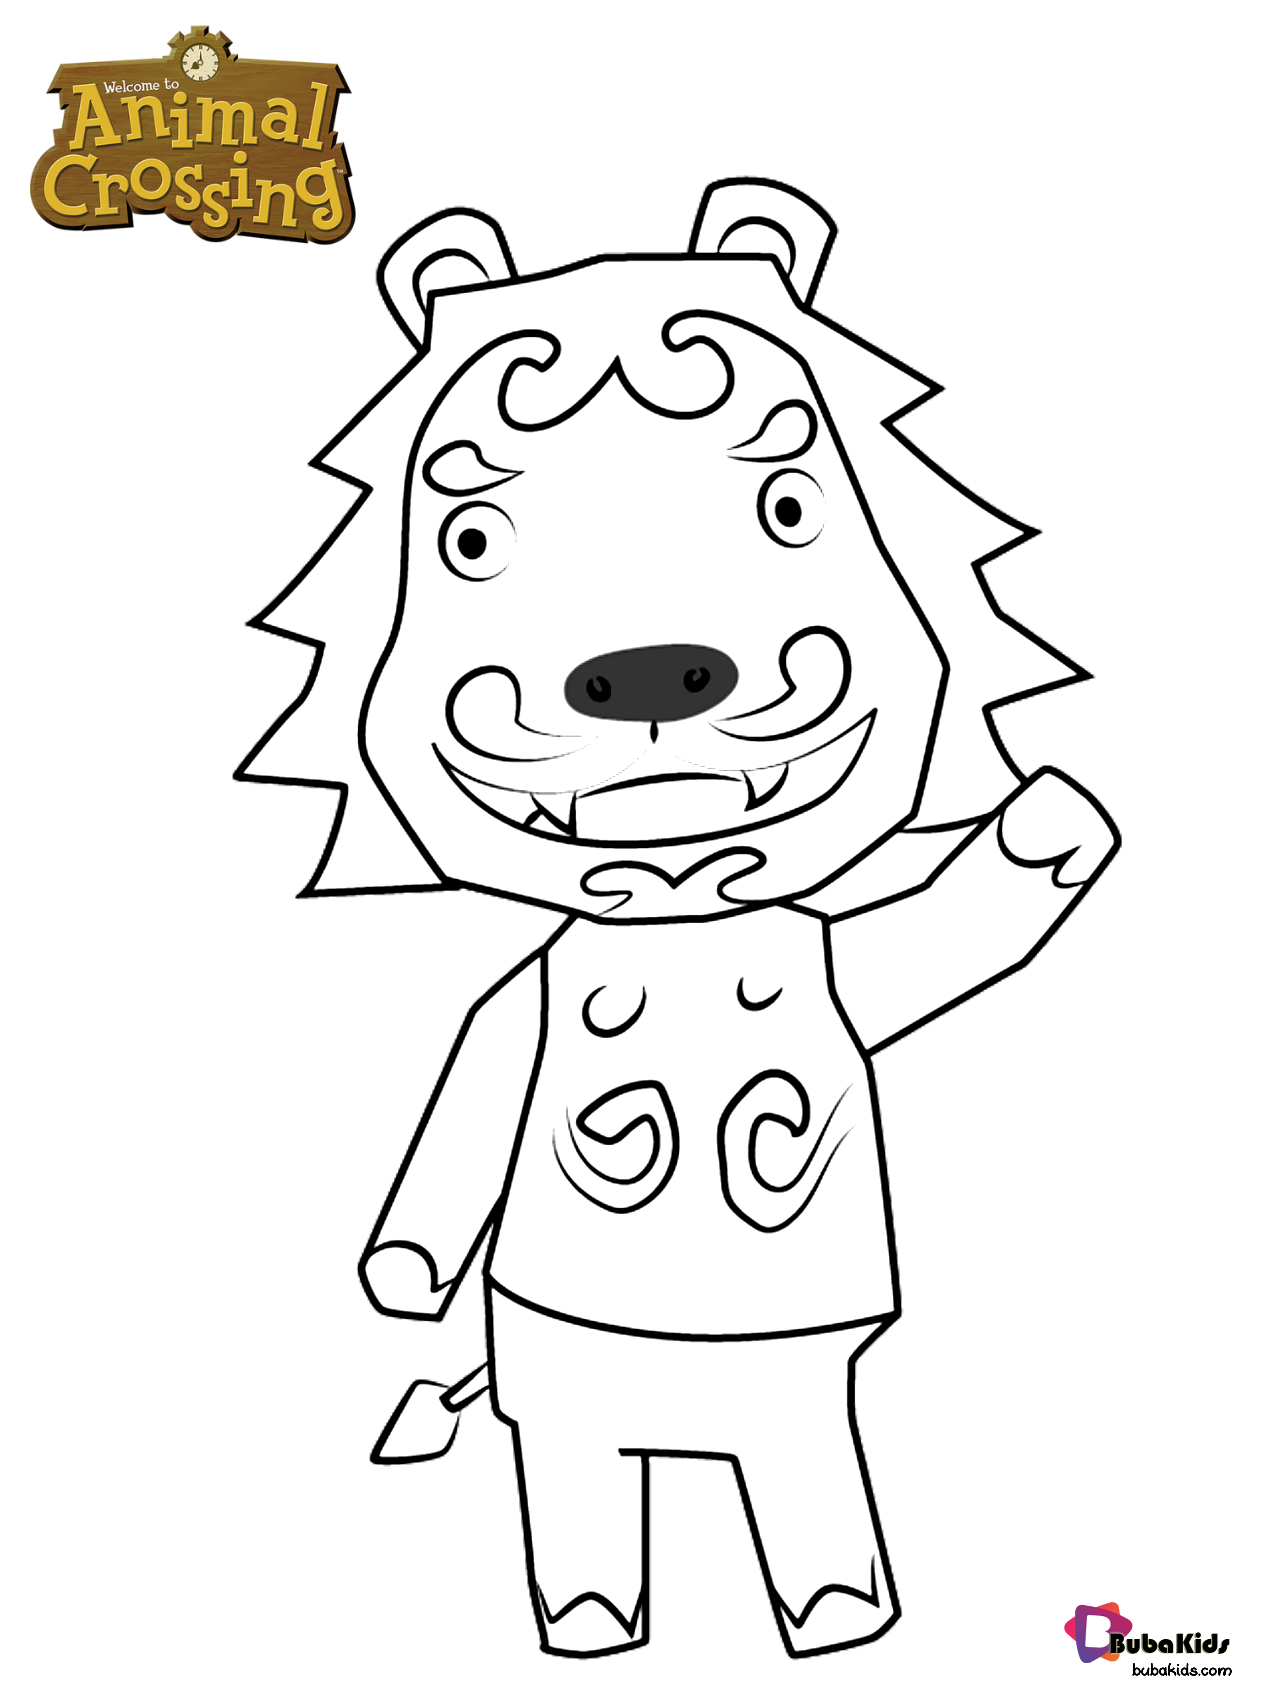 Free and printable picture of Rory from Animal Crossing character coloring page Wallpaper